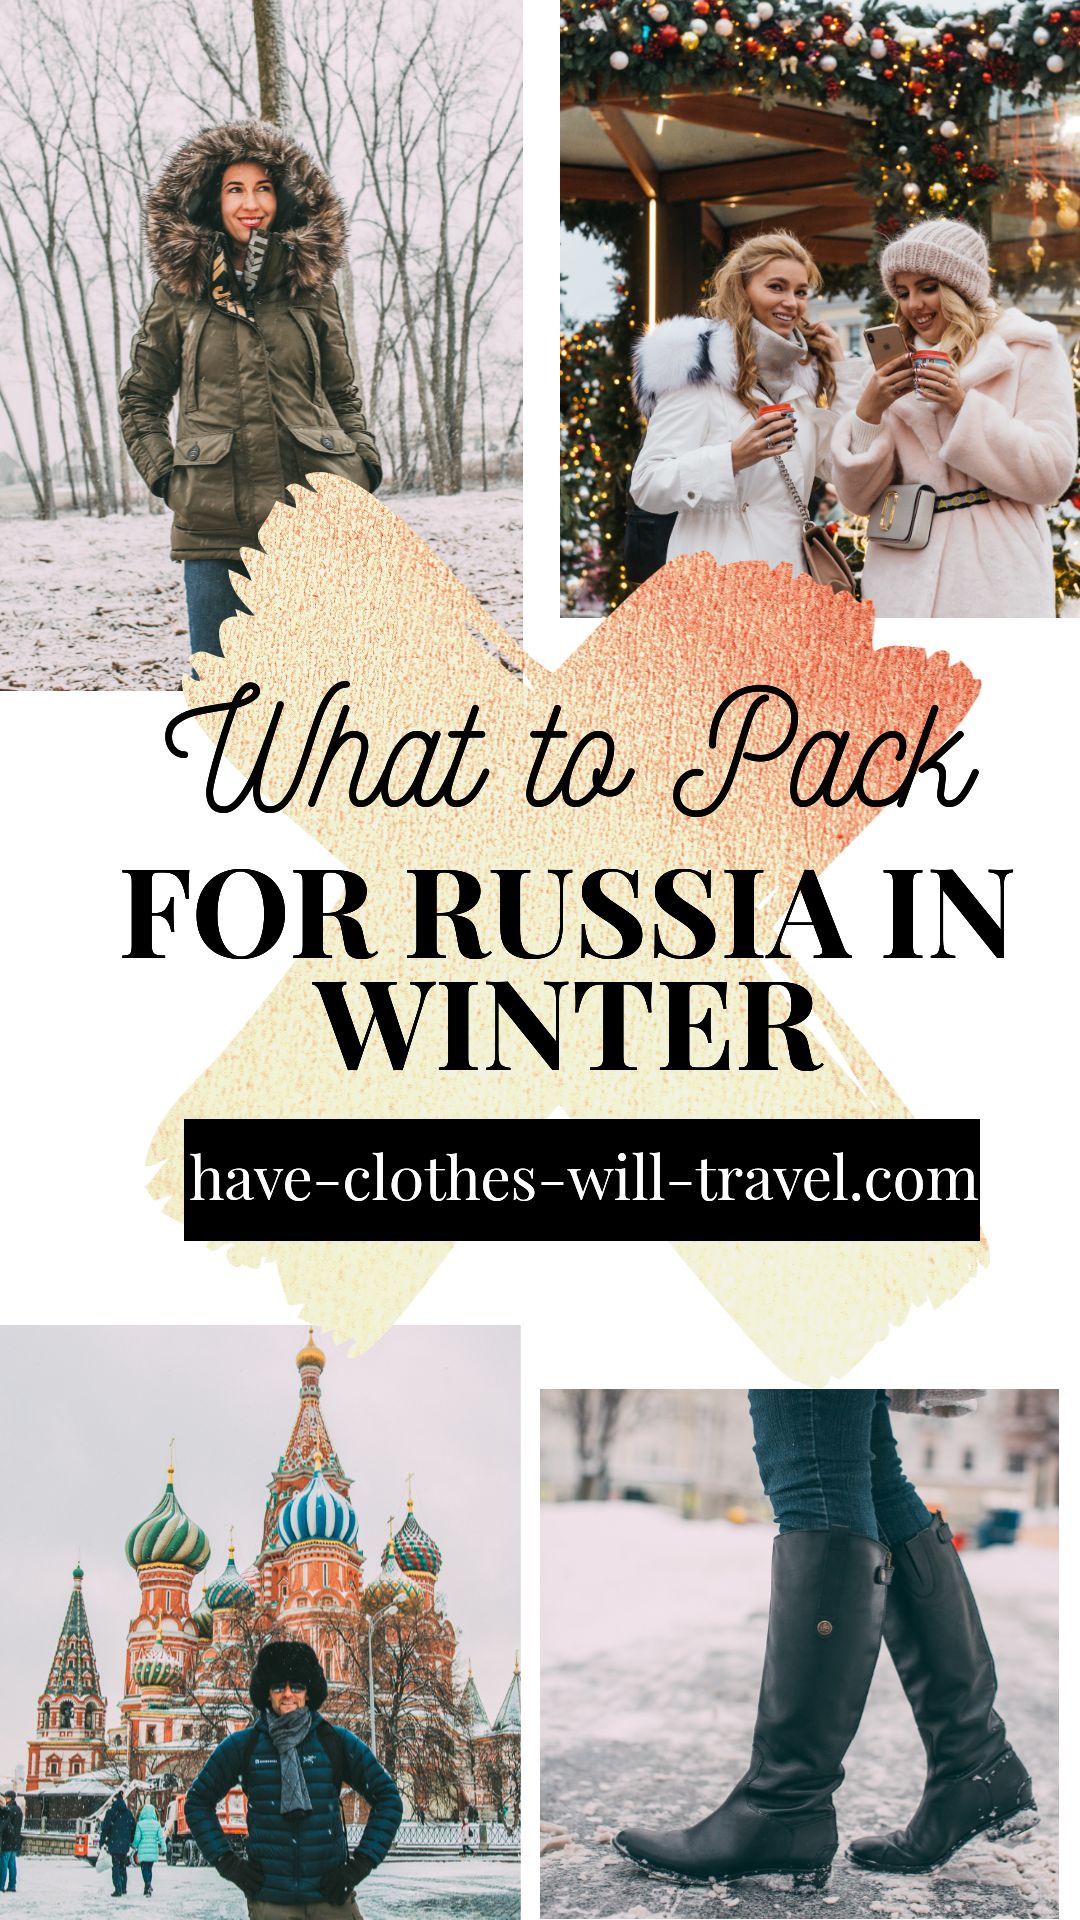 A collage of images showing different scenes of Russia in winter. Text in the center of the image says "what to pack for Russia in Winter"